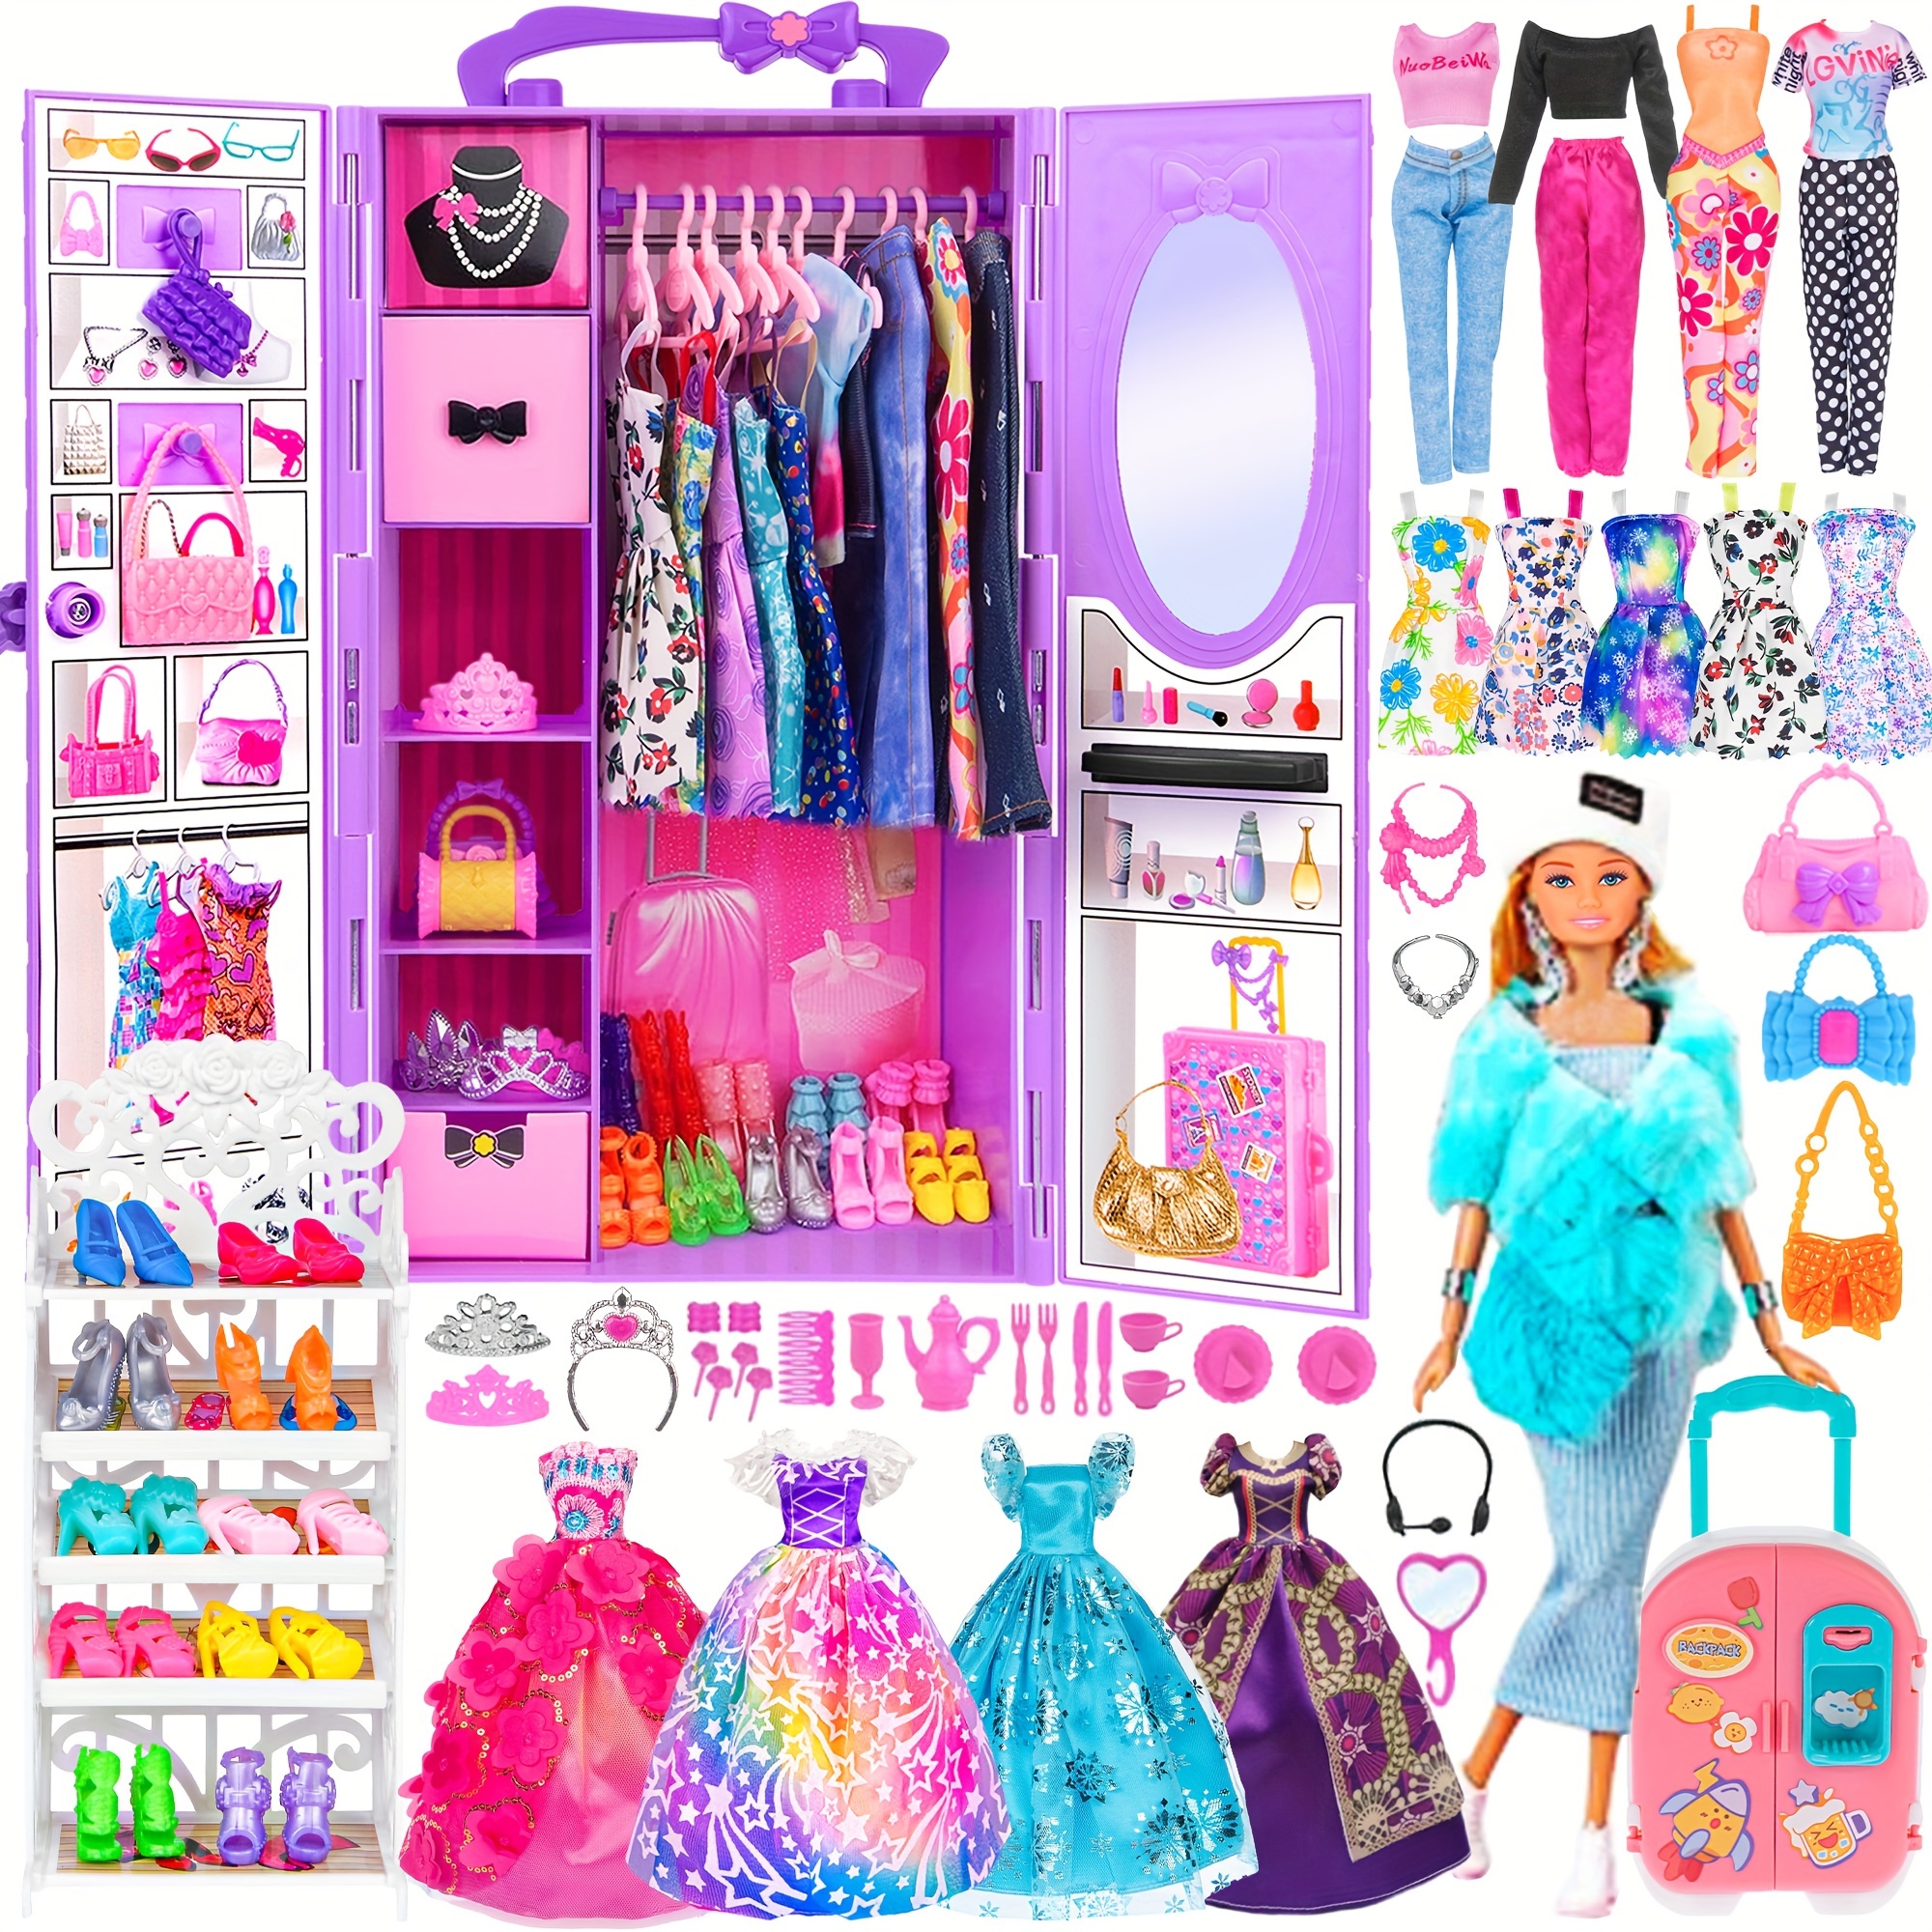 

Doll And Accessories Doll Closet Playset With 106 Pcs Doll Clothes And Accessories For Girls 6-12 Including 1 Doll, Closet, Stylish Blue Set, Luggage, Shoe Rack, Wedding Gowns (one Doll)